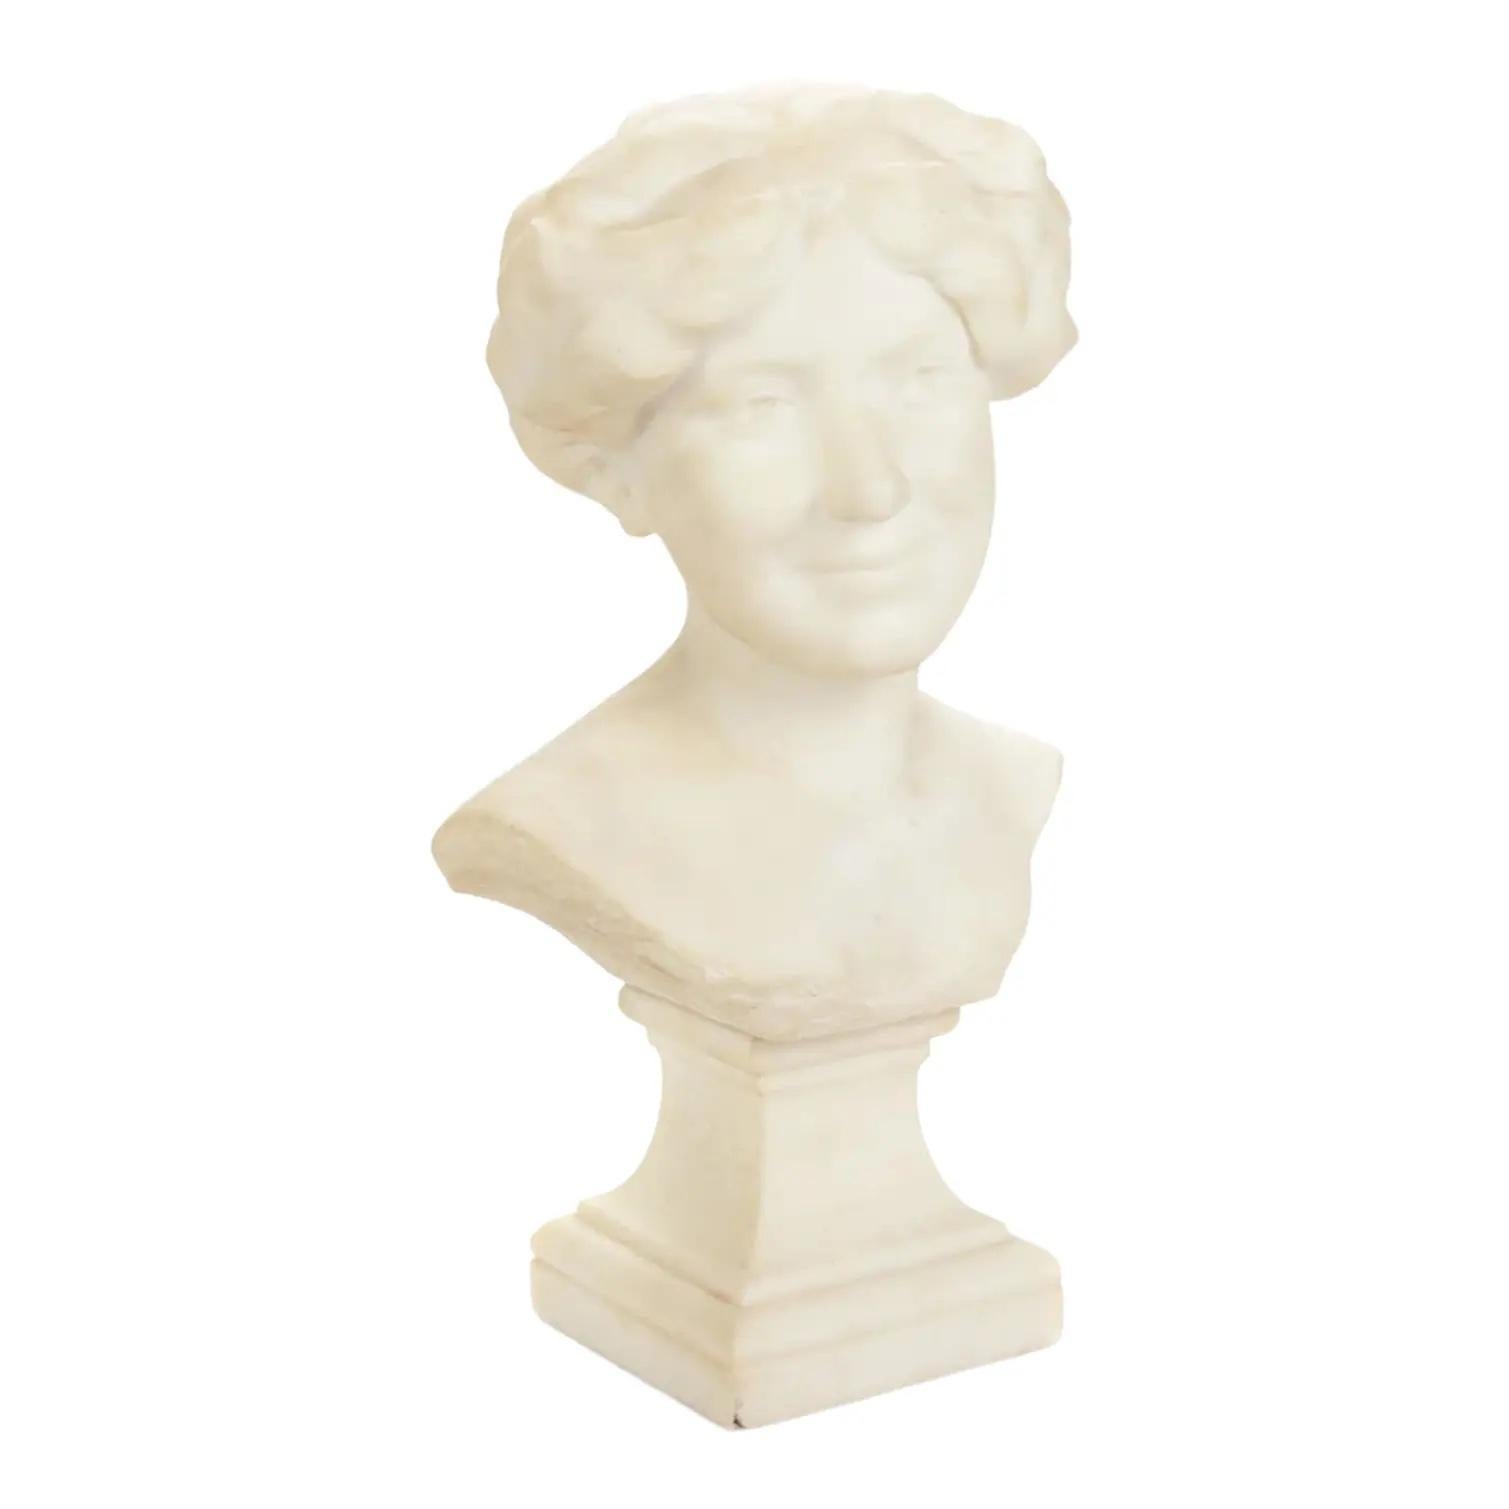 A stunning carved Carrara marble bust of a young woman displayed on a carved marble pedestal

Bust by Paul Philippe

France, Circa 1920s

Overall measures: 11.75